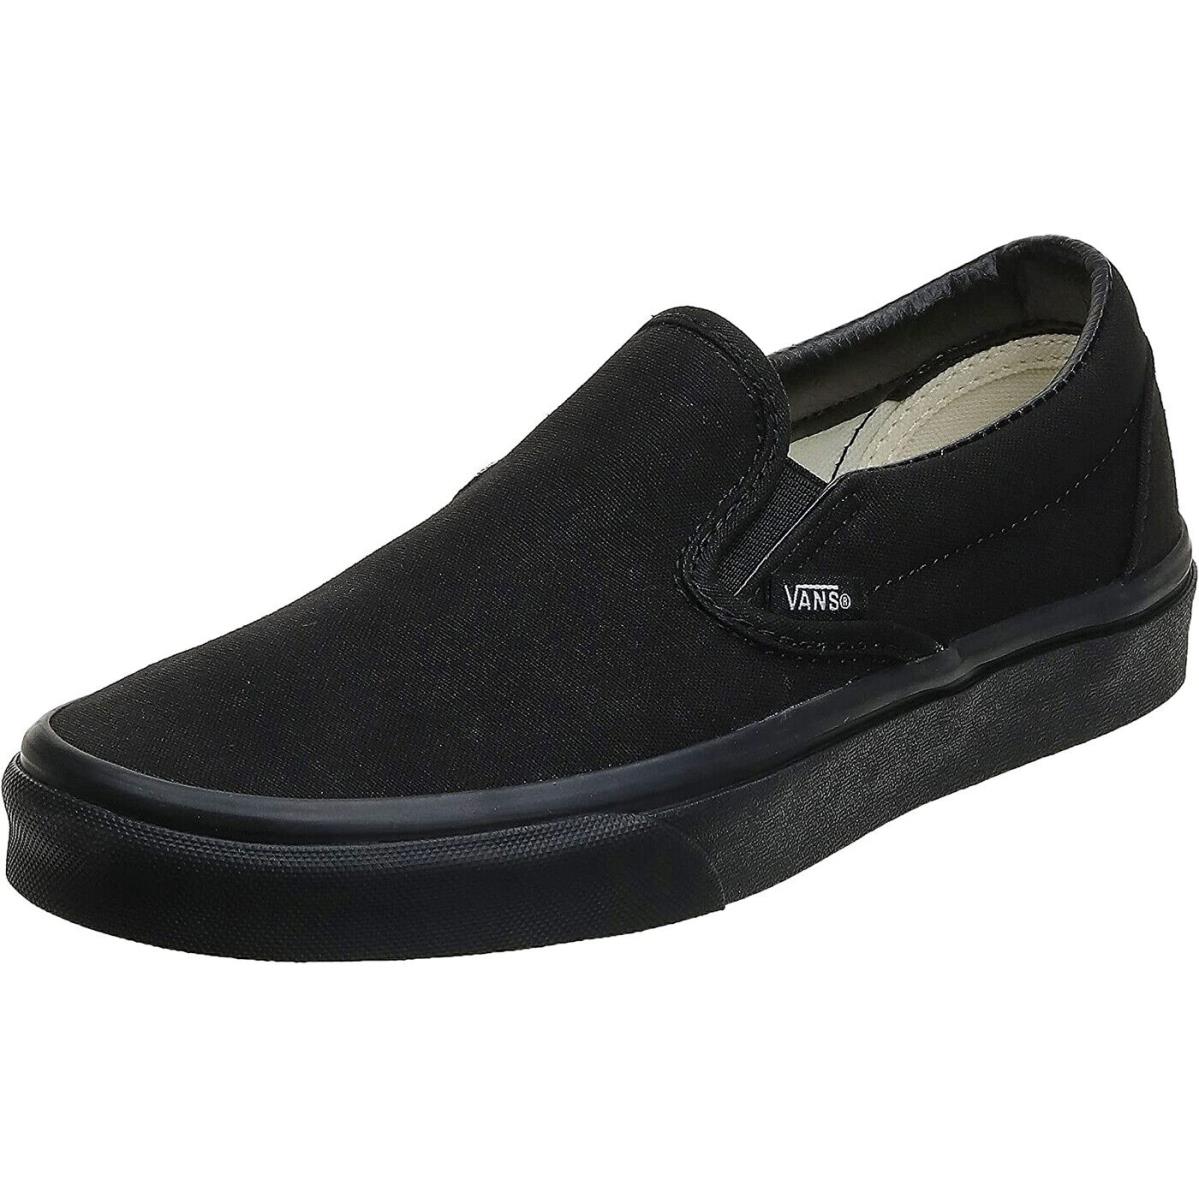 Vans Classic Slip On All Black Unisex Sneakers Canvas Shoes